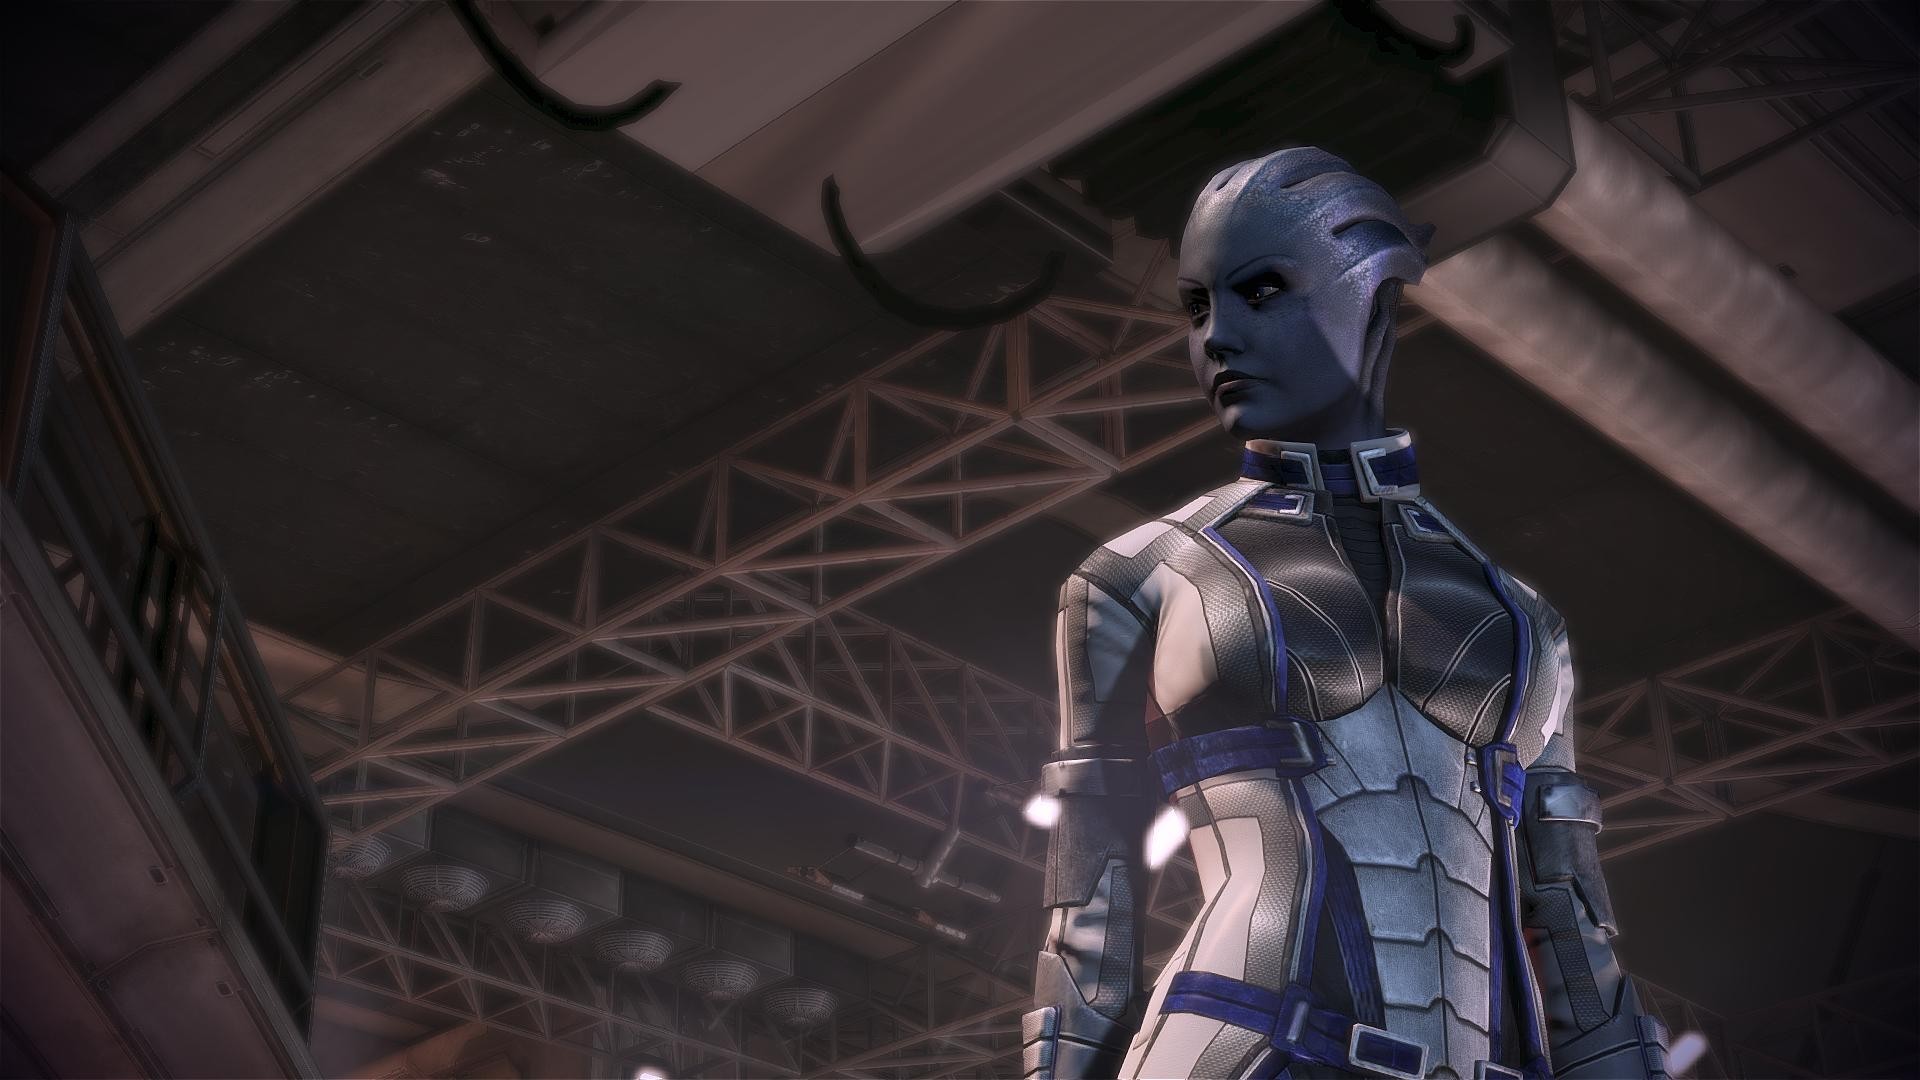 General 1920x1080 video games Mass Effect Dr. Liara T'Soni Mass Effect 2 Mass Effect 3 video game girls science fiction science fiction women PC gaming video game characters